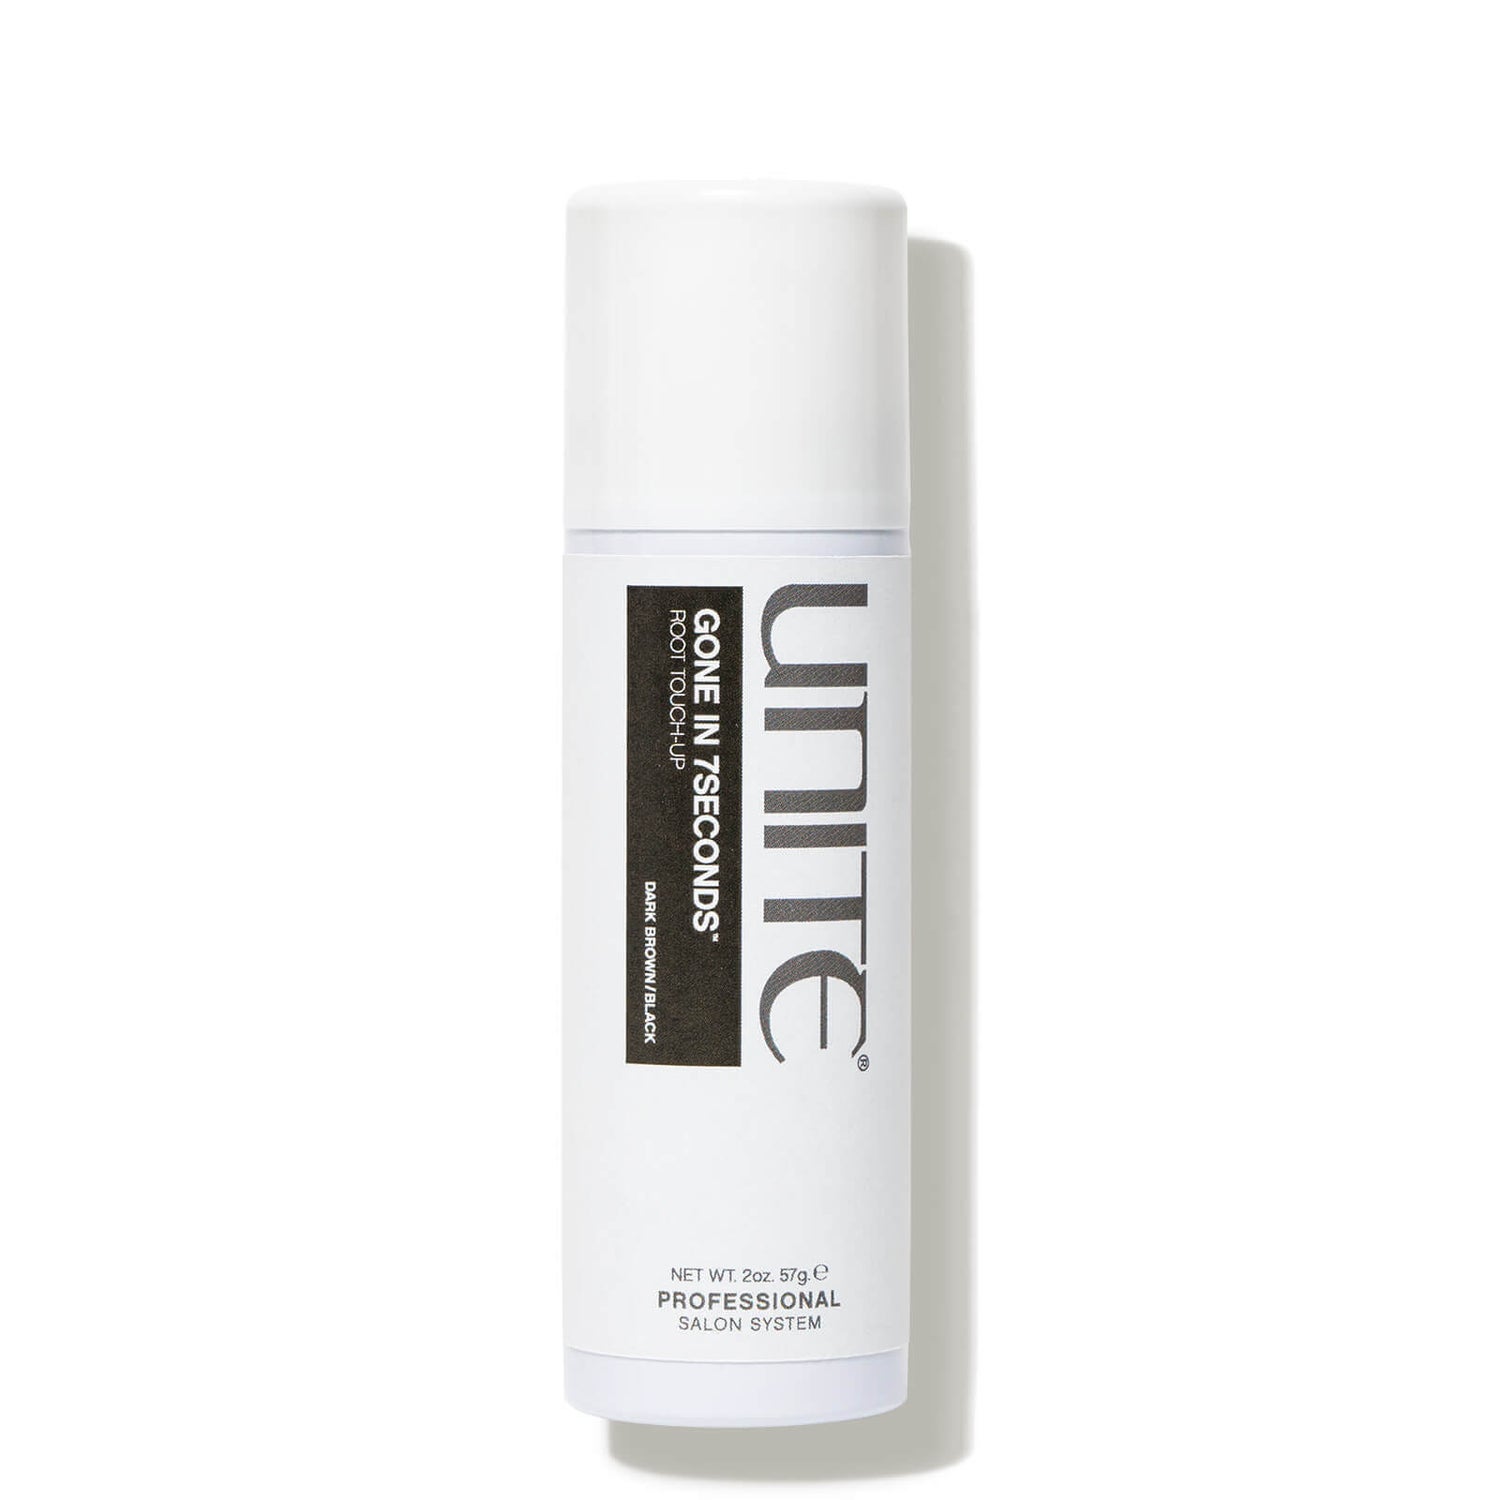 UNITE Hair GONE IN 7 SECONDS Root Touch Up 2 oz.